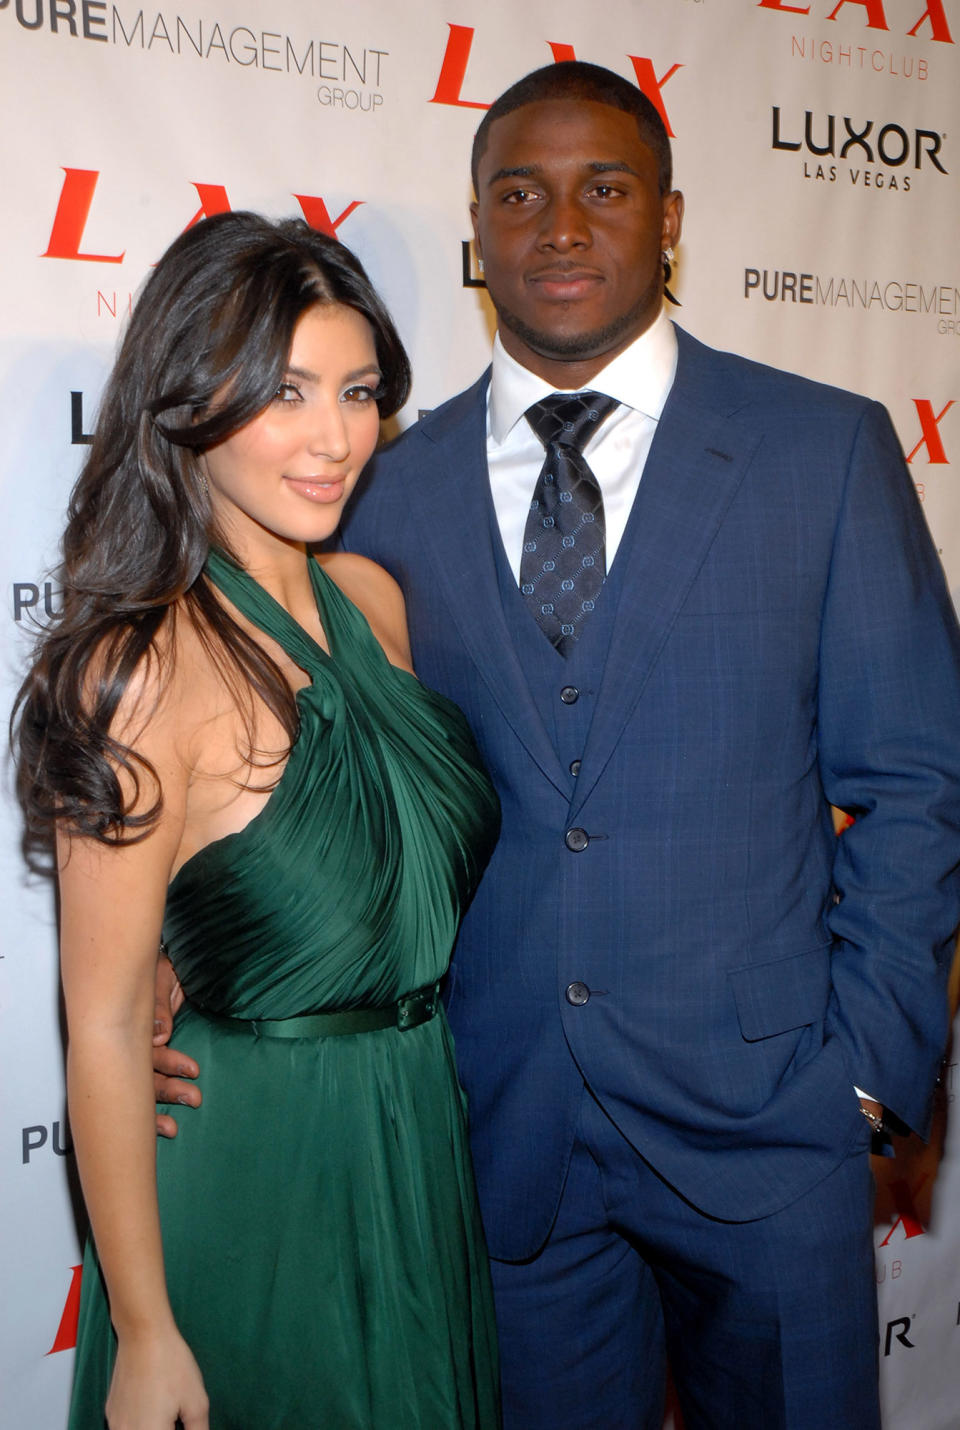 The Keeping Up With the Kardashians star dated the football player on and off from 2007 until 2010.